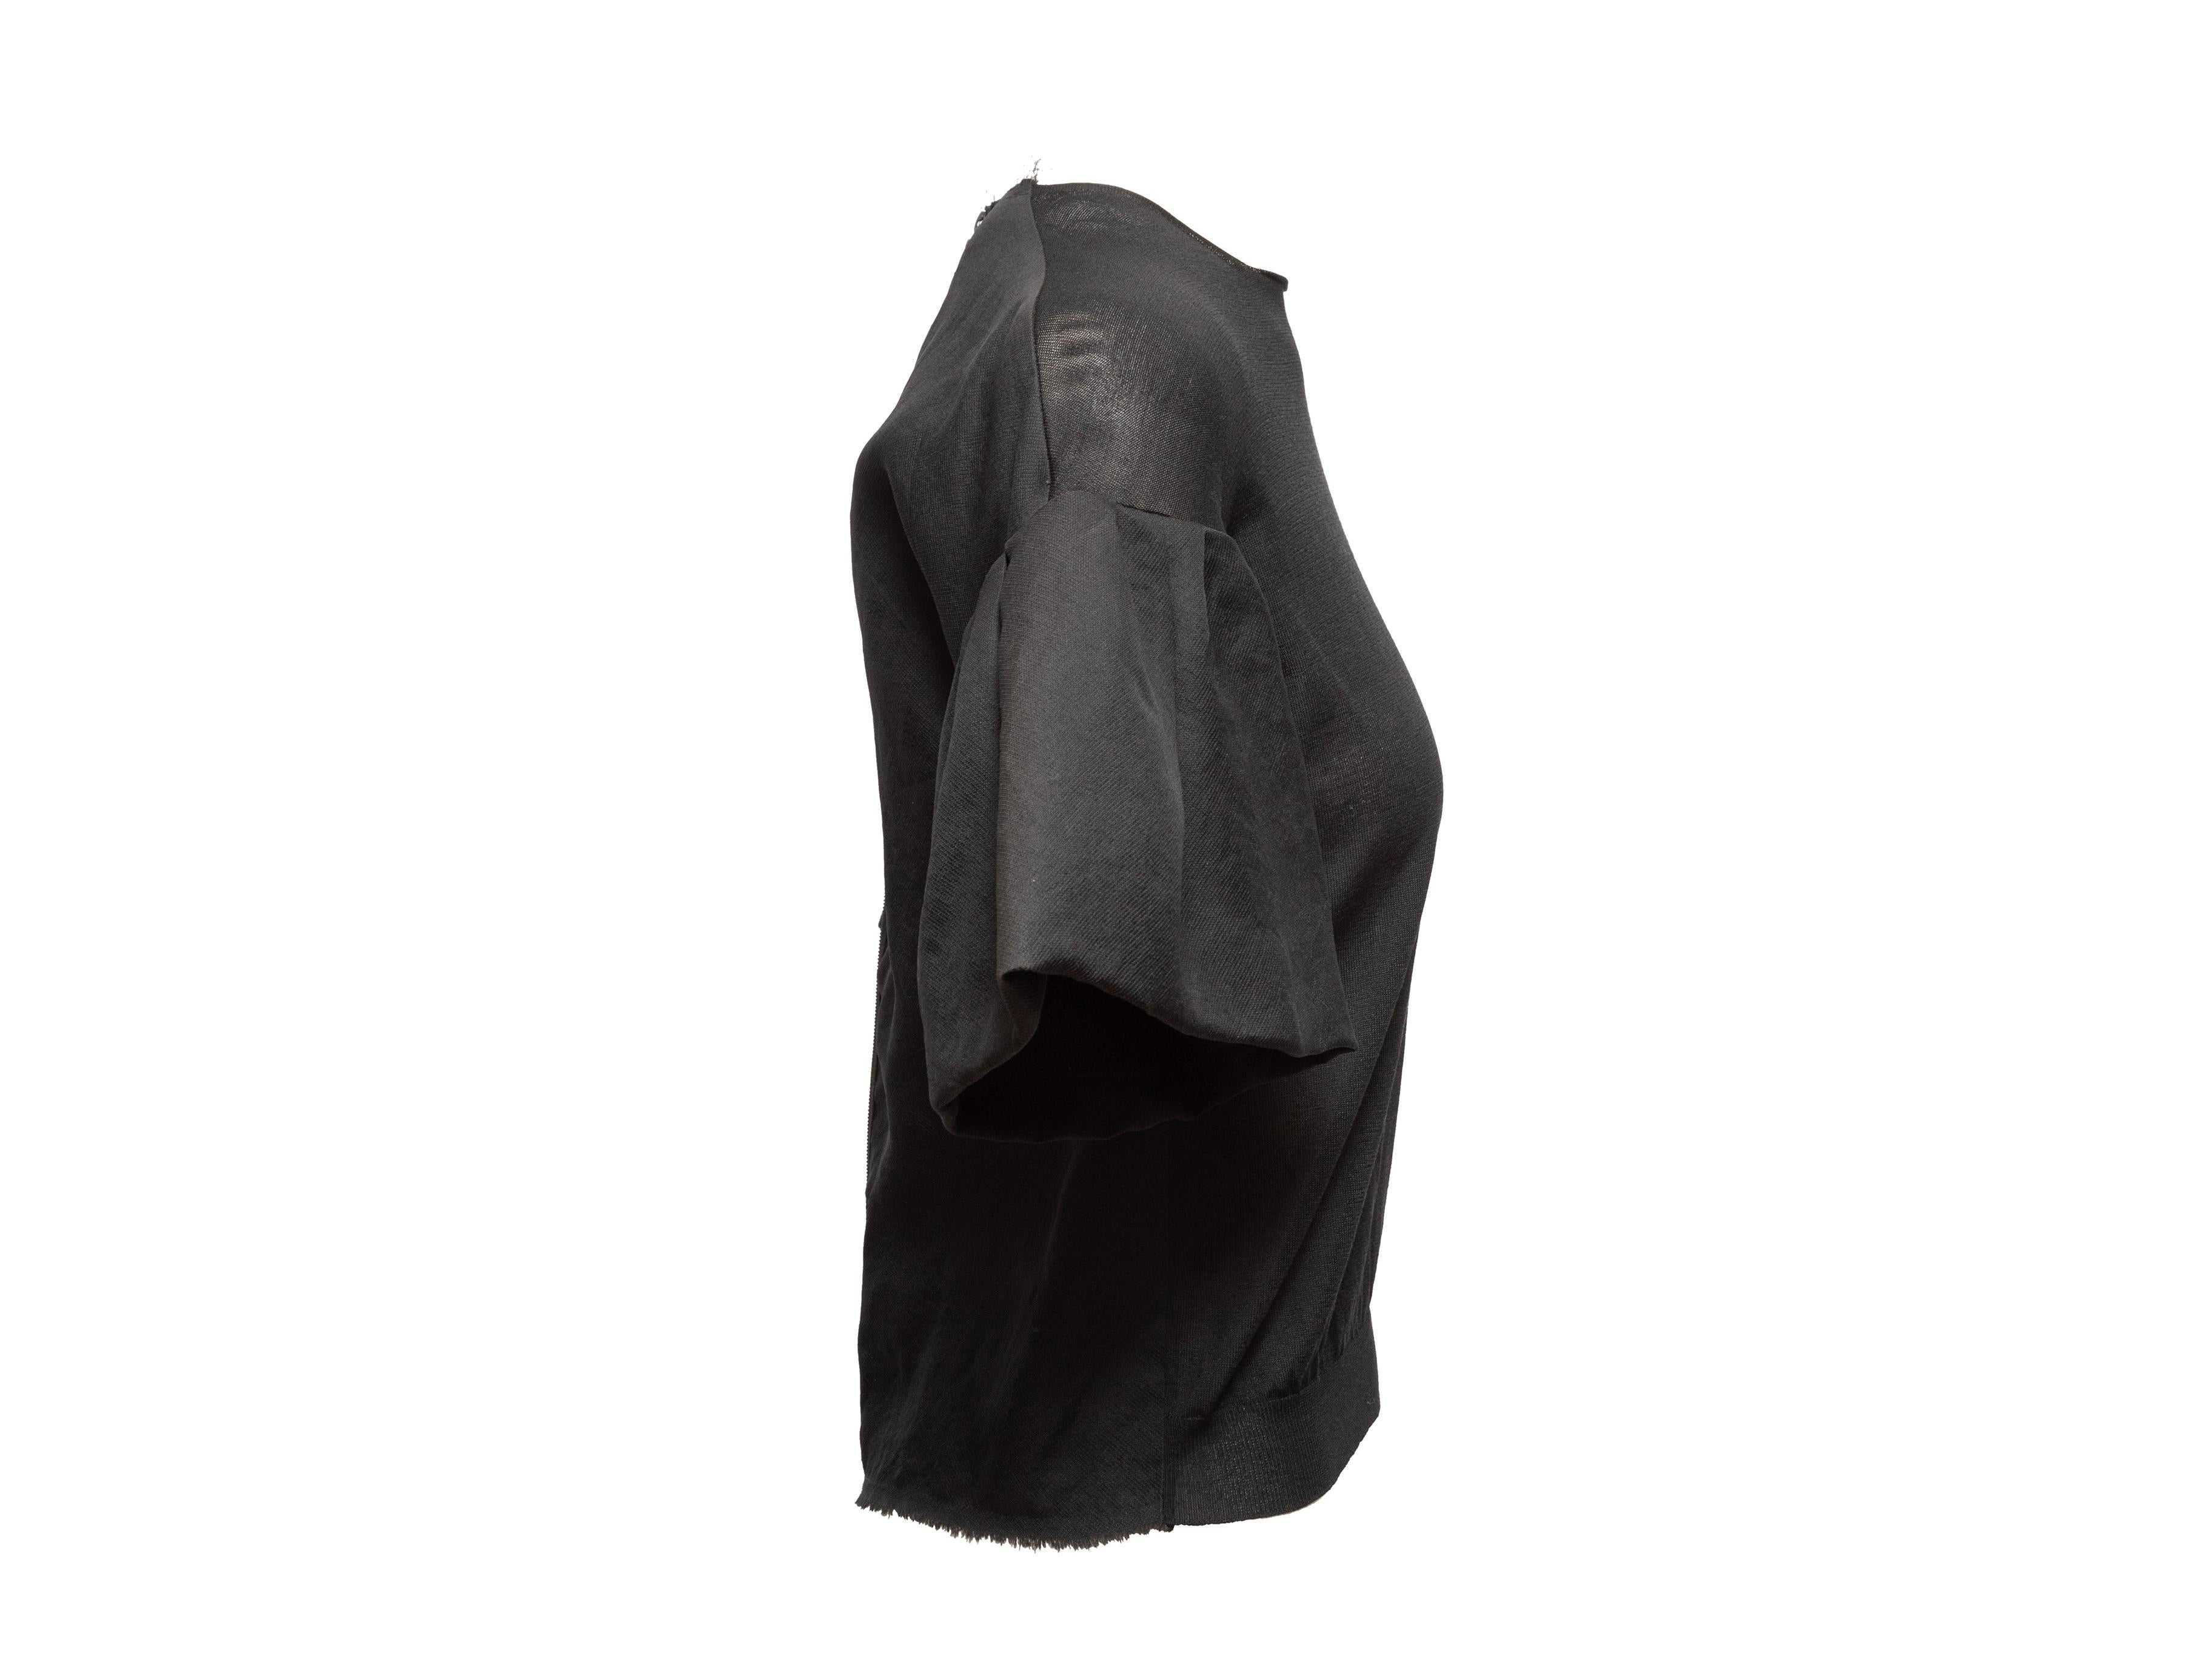 Product Details: Black silk top by Lanvin. V-neck. Short ruffle-trimmed sleeves. Zip closure at center back. 34